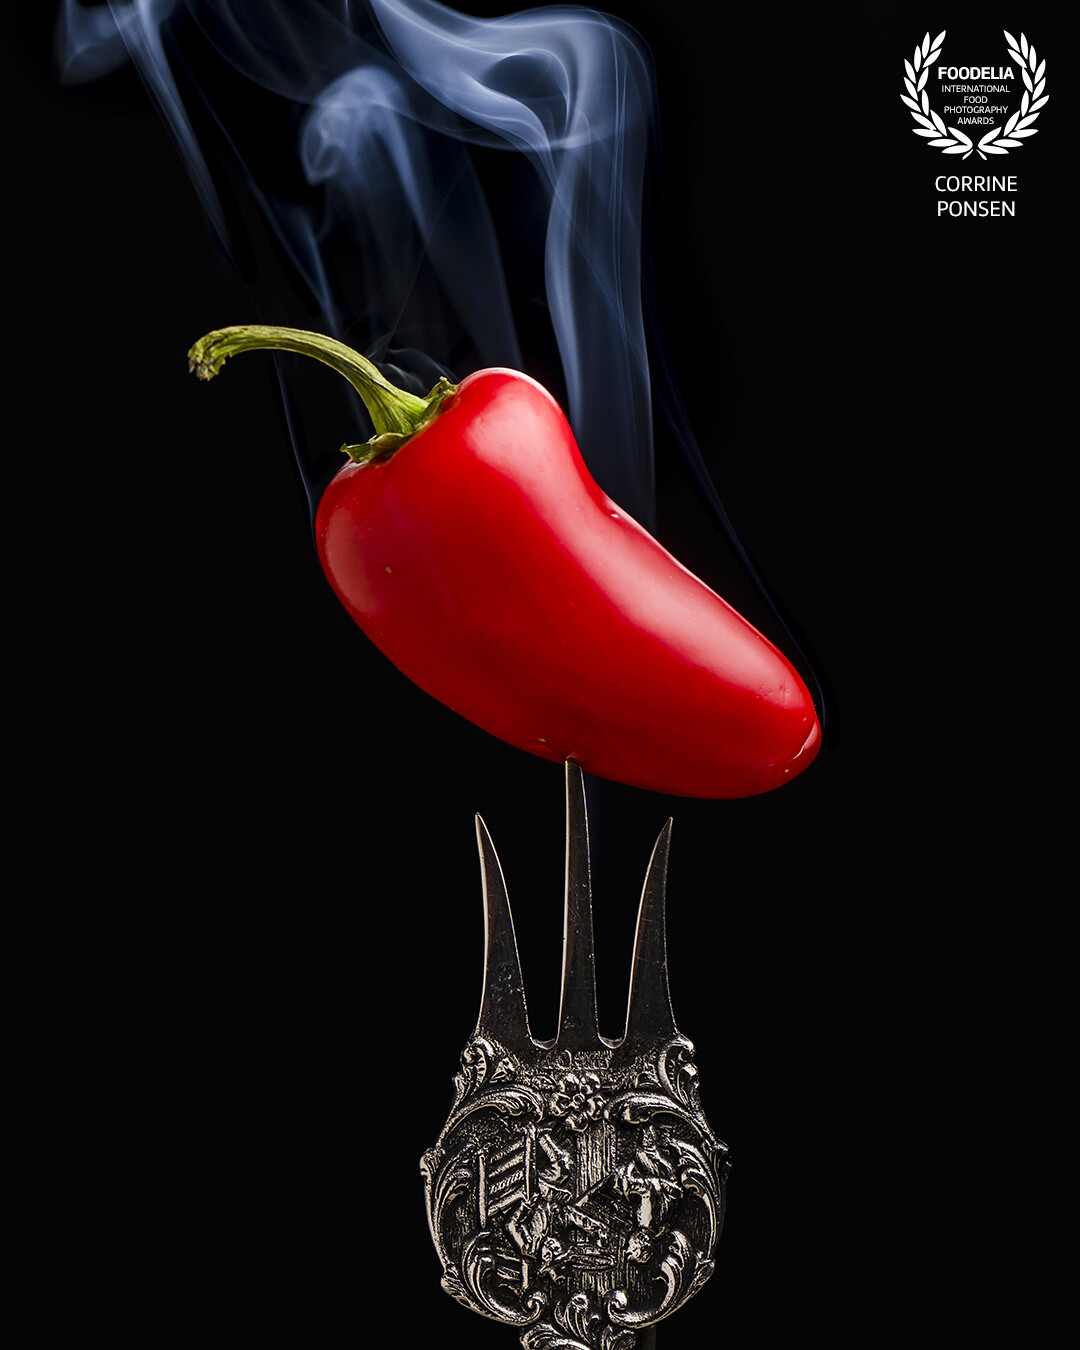 Red hot pepper on a fork. Lighted with 2 flashes on a softbox. The backlight was needed to light up the smoke.<br />
The vintage fork is just too cool.